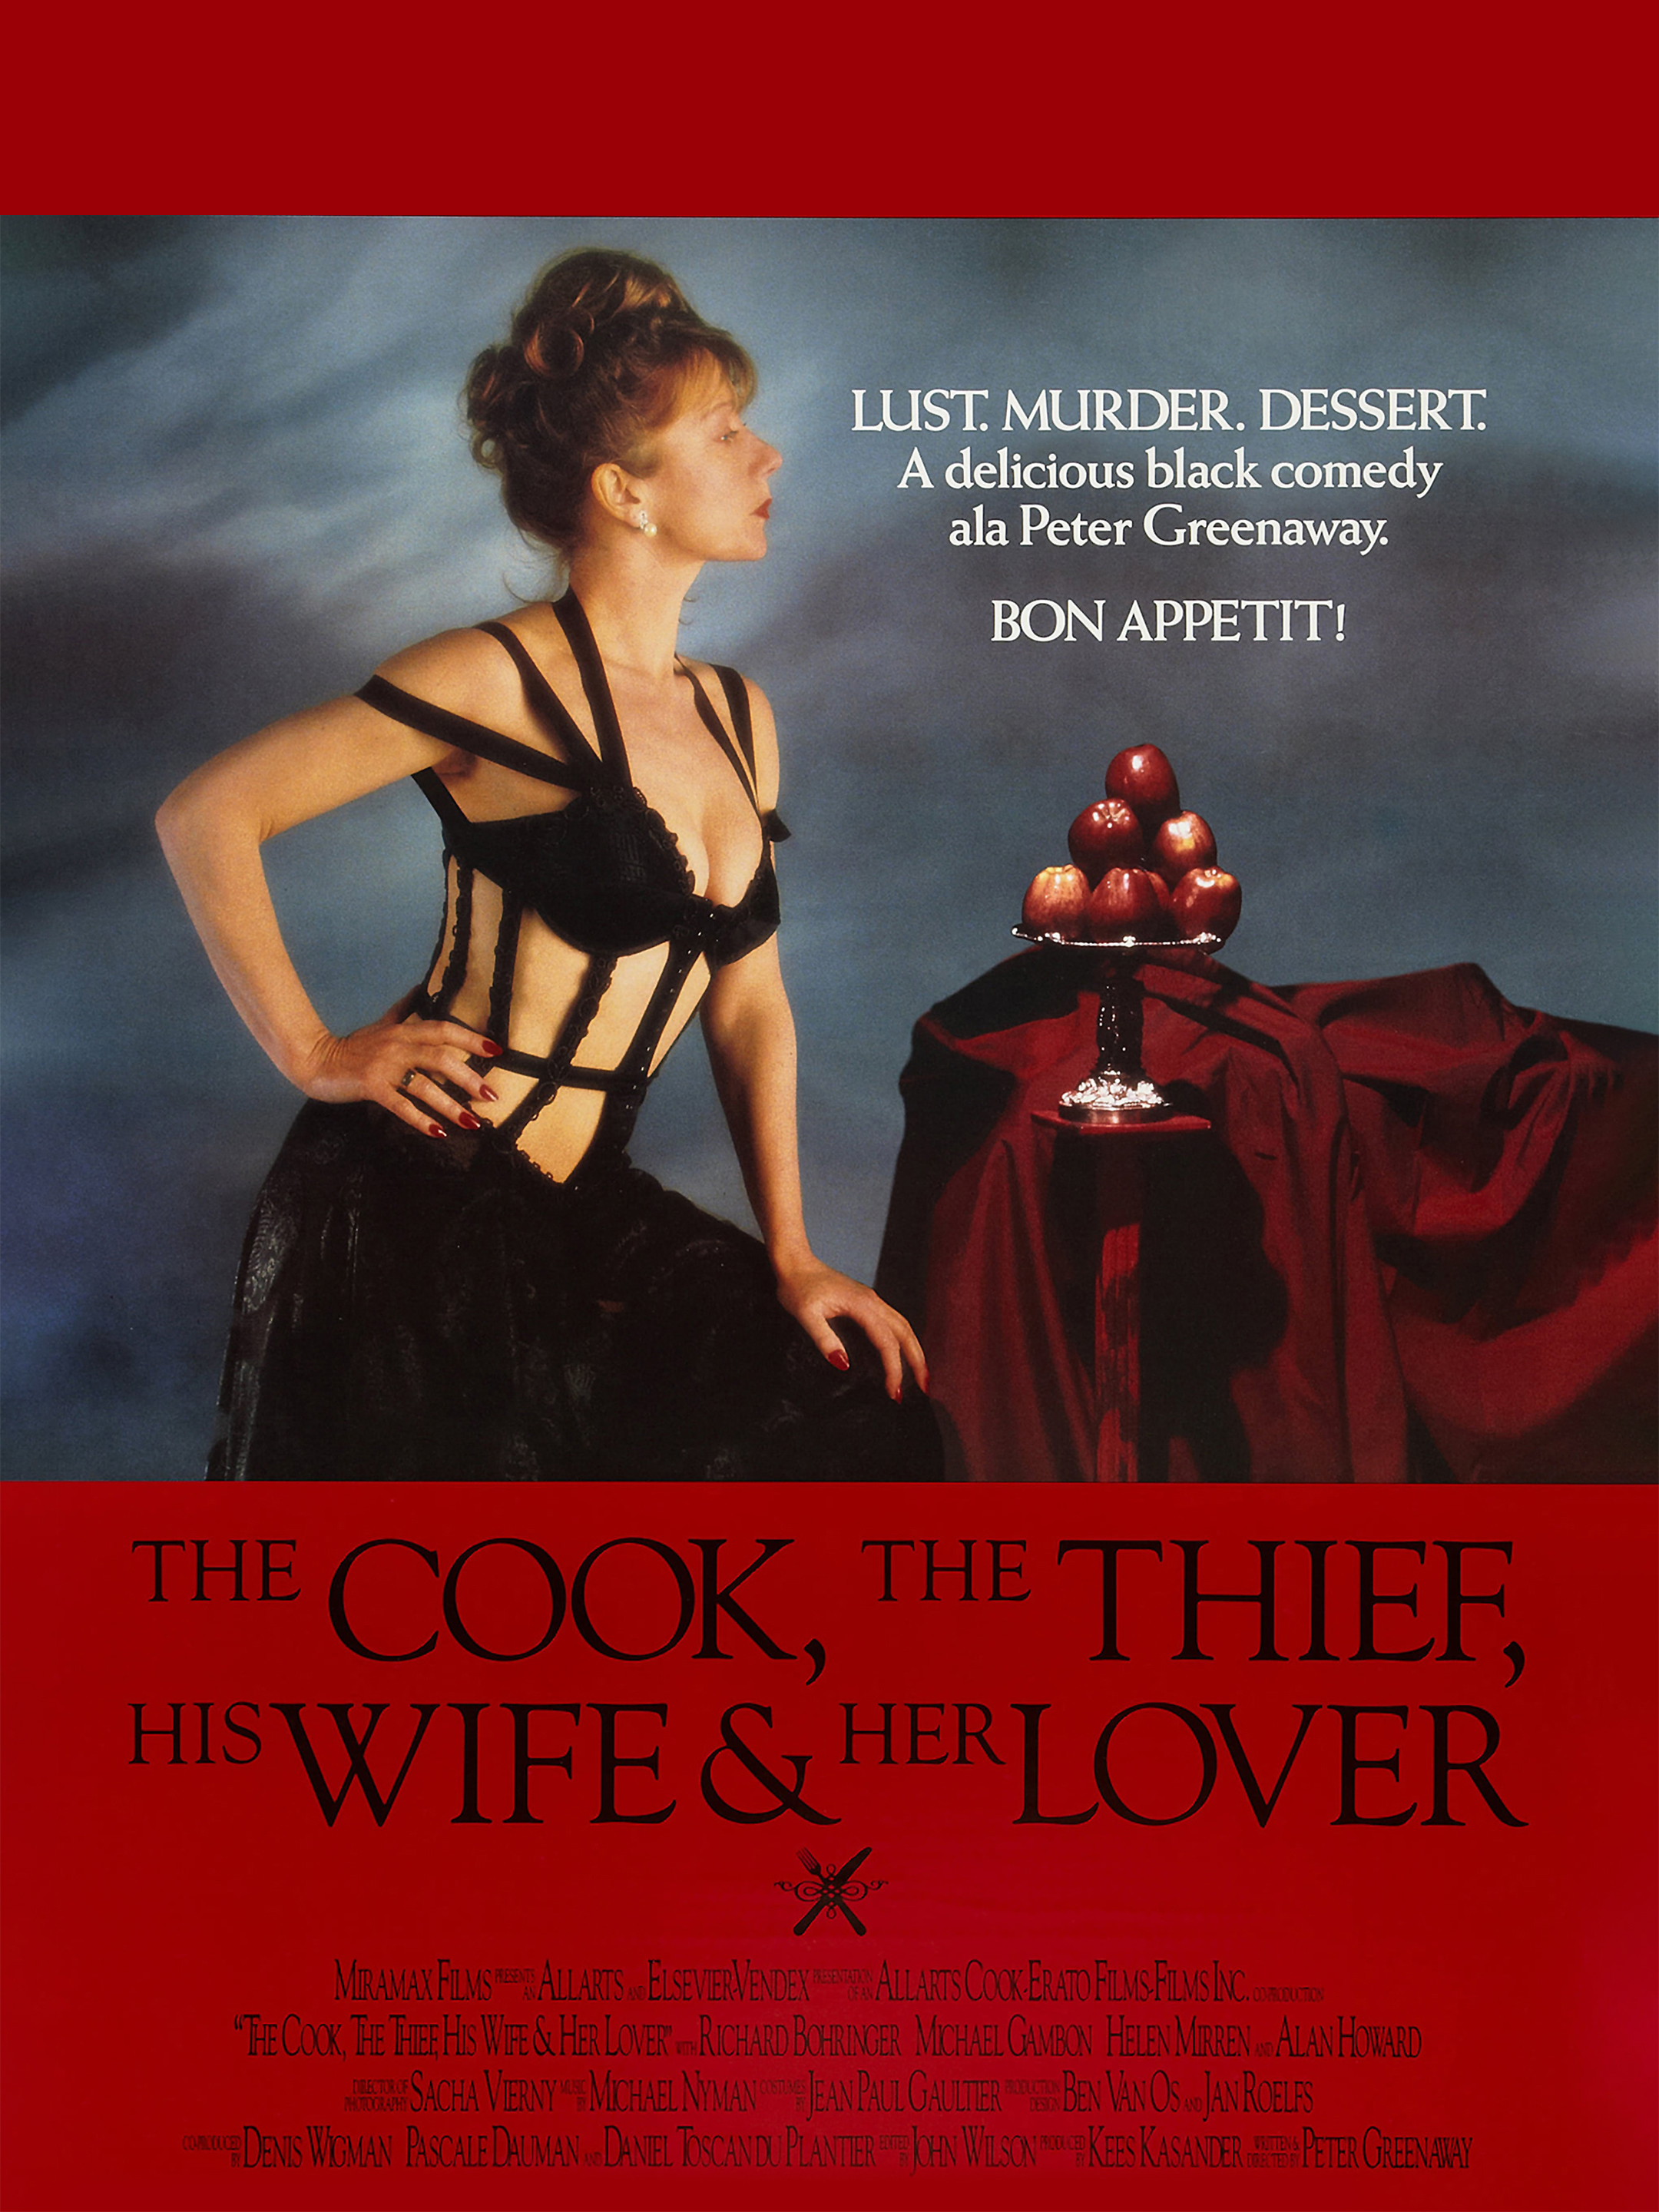 The Cook, the Thief, His Wife and Her Lover picture image